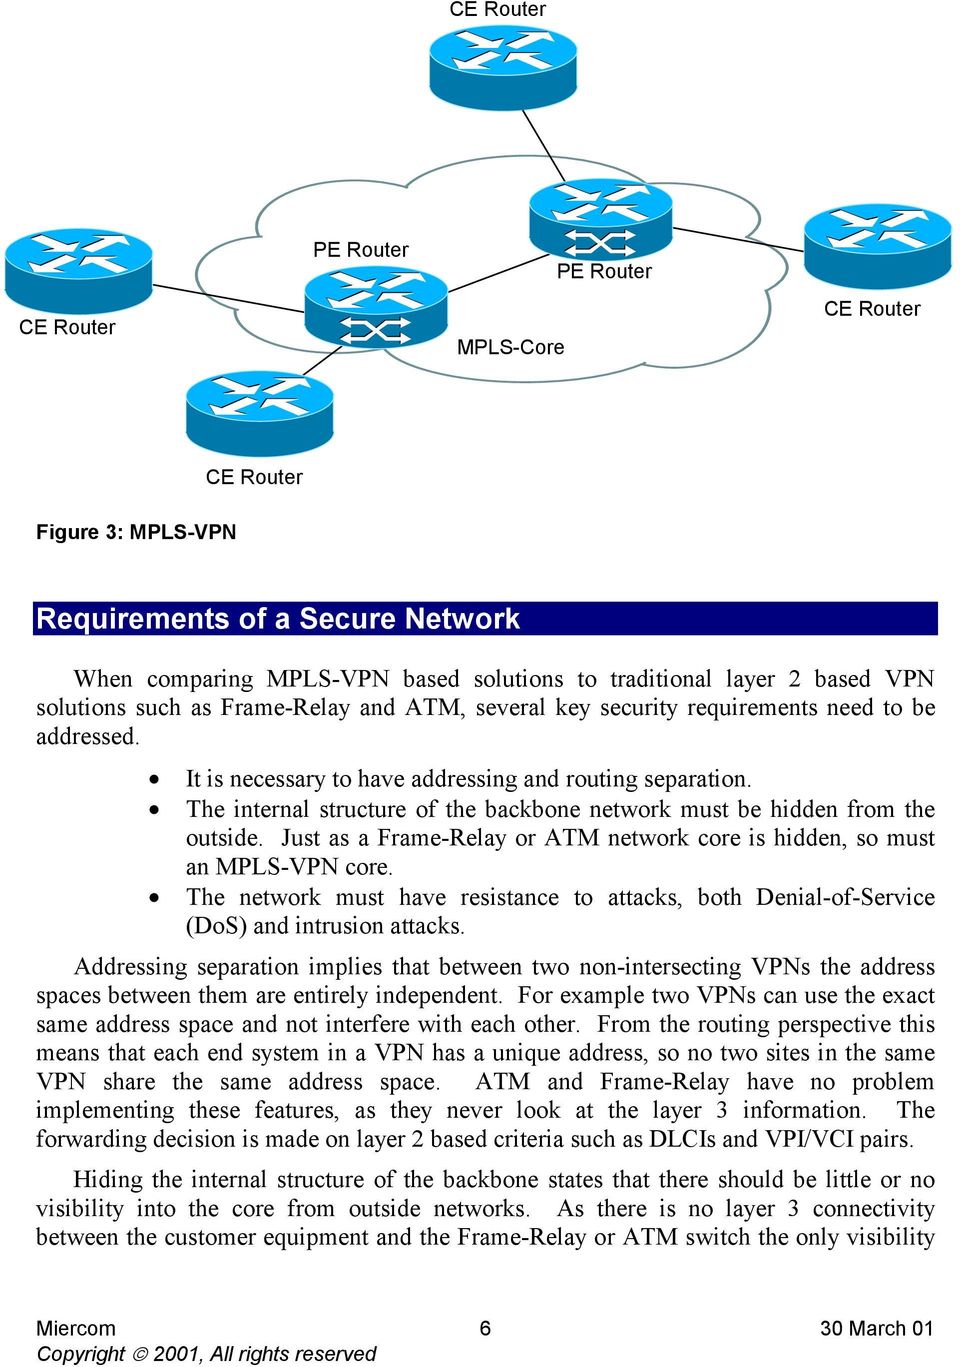 The internal structure of the backbone network must be hidden from the outside. Just as a Frame-Relay or ATM network core is hidden, so must an MPLS-VPN core.